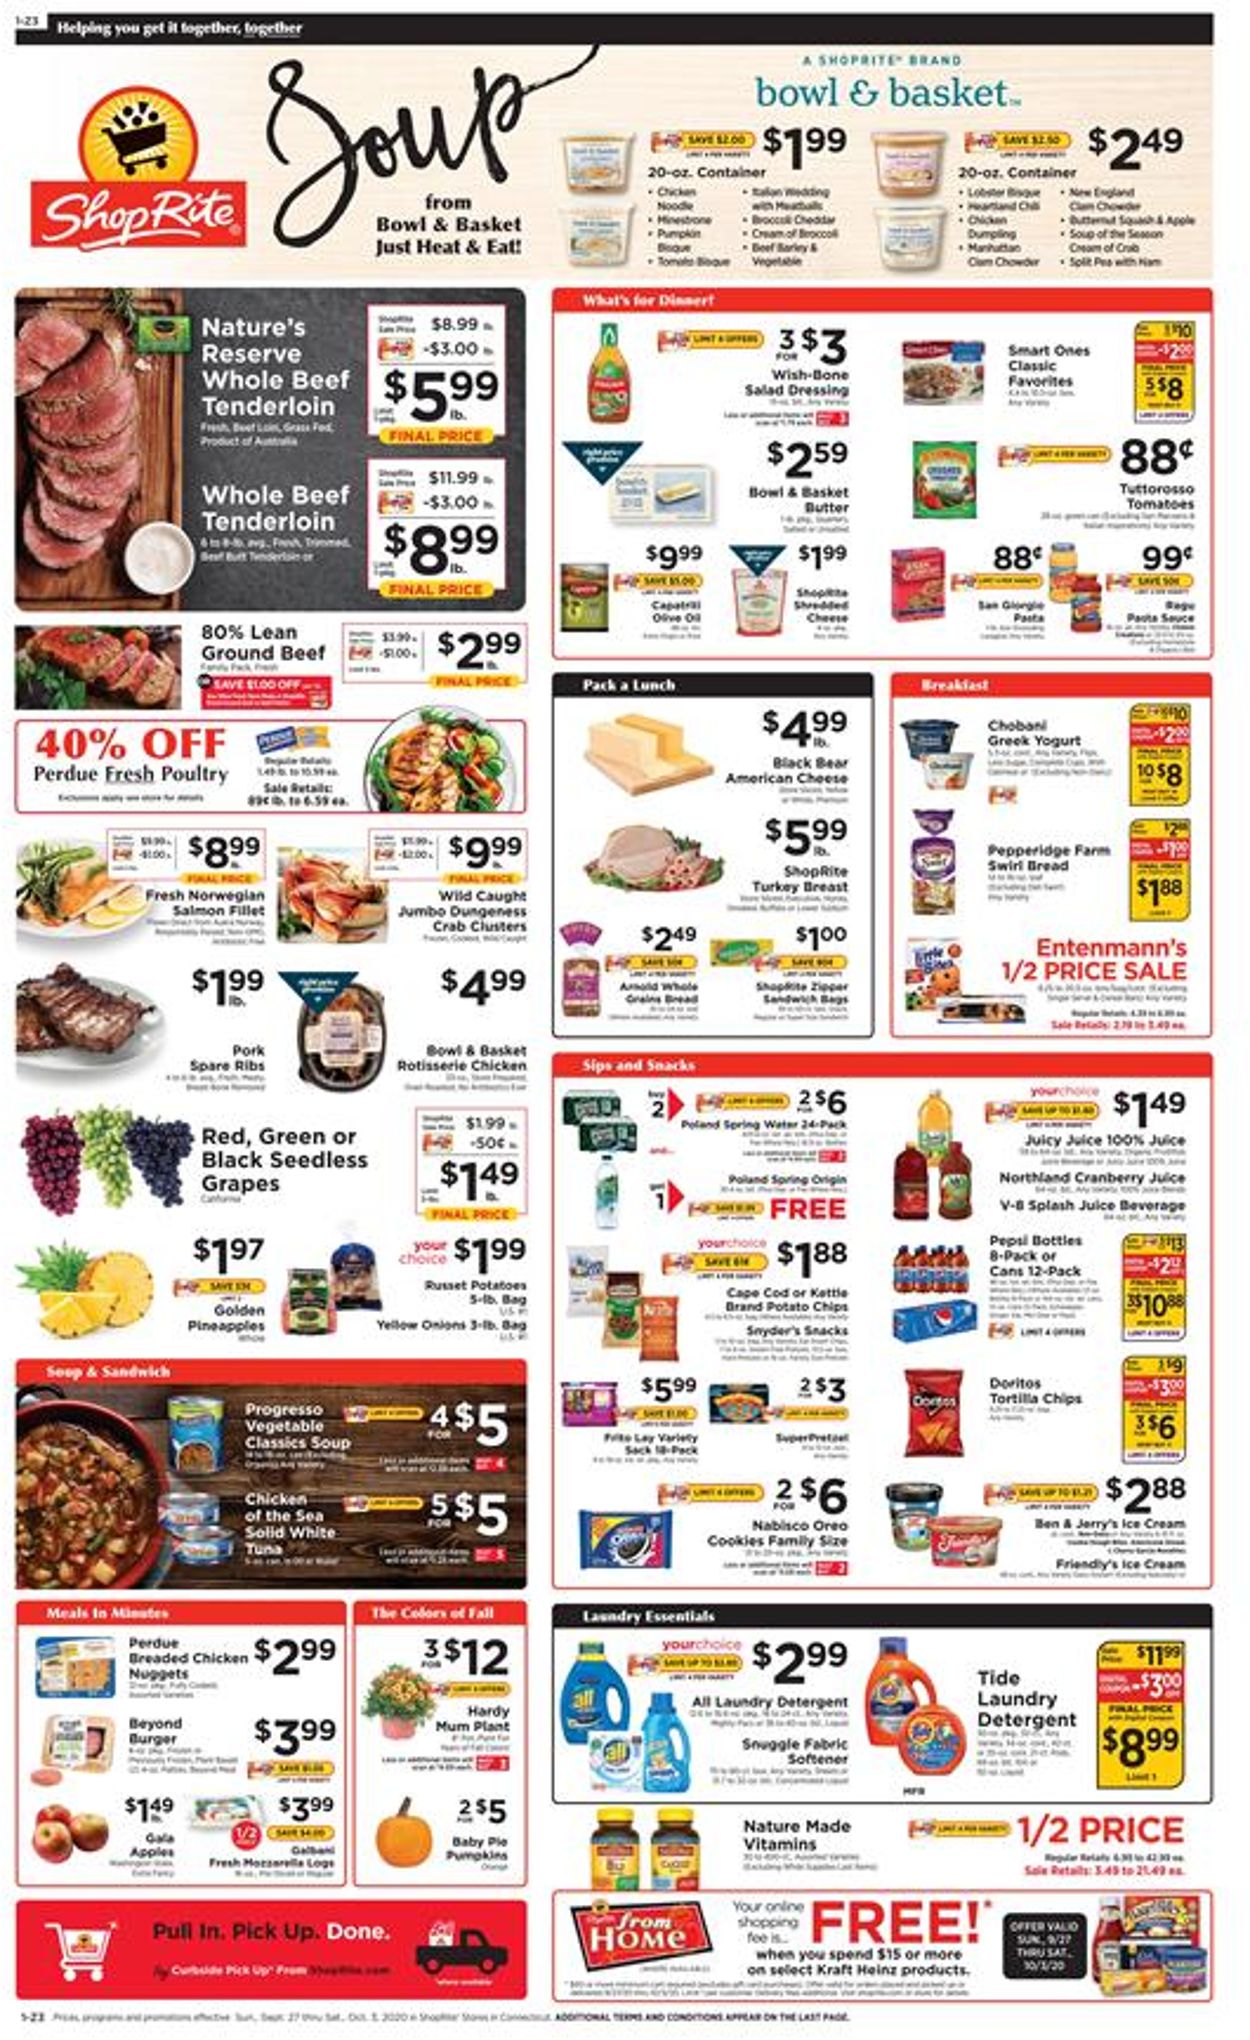 ShopRite Current weekly ad 09/27 - 10/03/2020 - frequent-ads.com